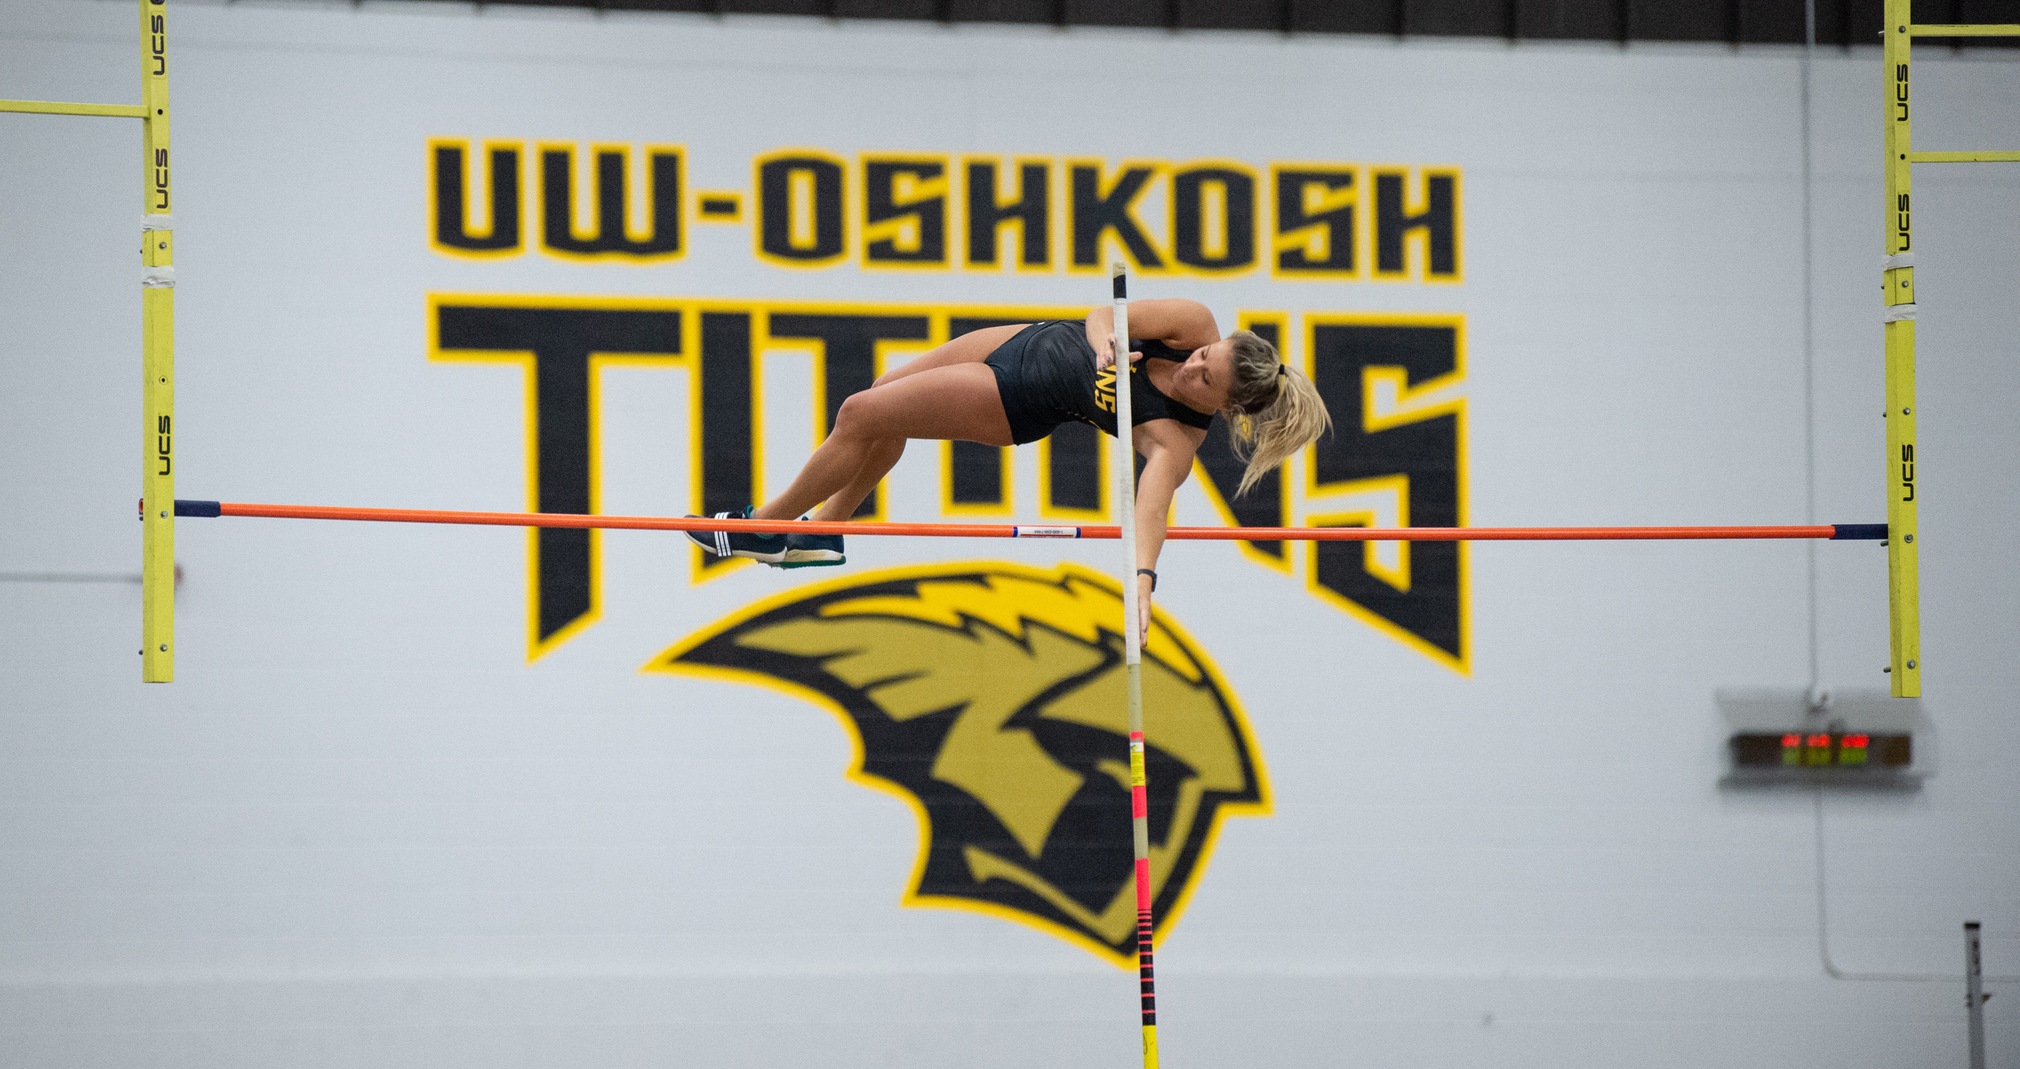 Megan Leahy won the pole vault at the Olivet Nazarene University Holiday Invitational with a height of 11-3 3/4.